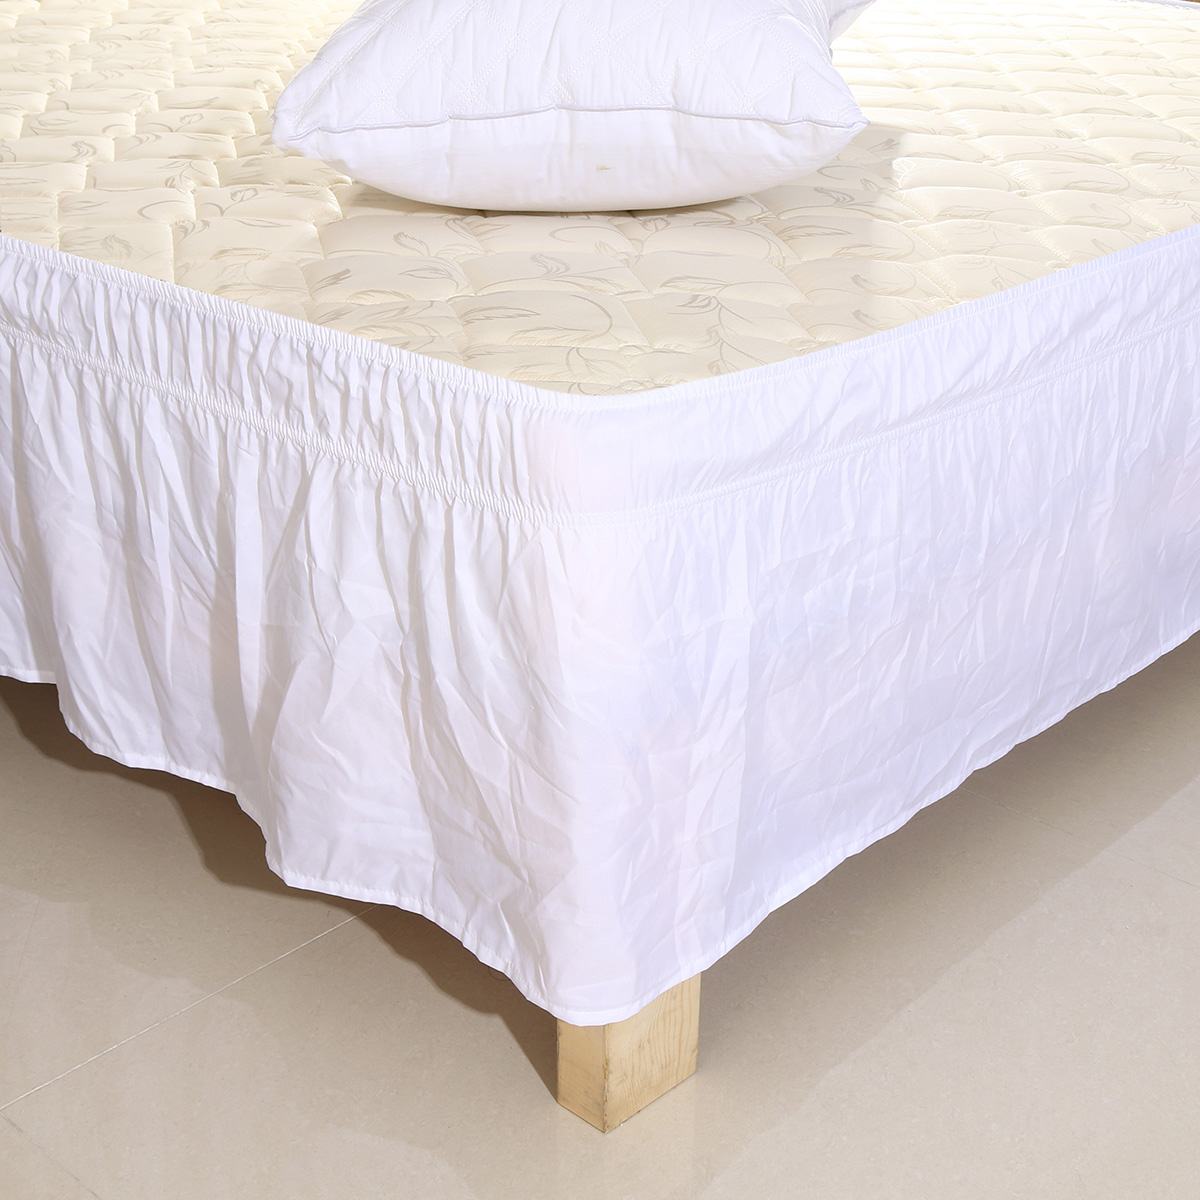 Wrap Around Hotel Queen Size Bed Skirt White Bed Shirt without Surface Elastic Band Single Queen King Easy On/Easy Off Bed Skirt